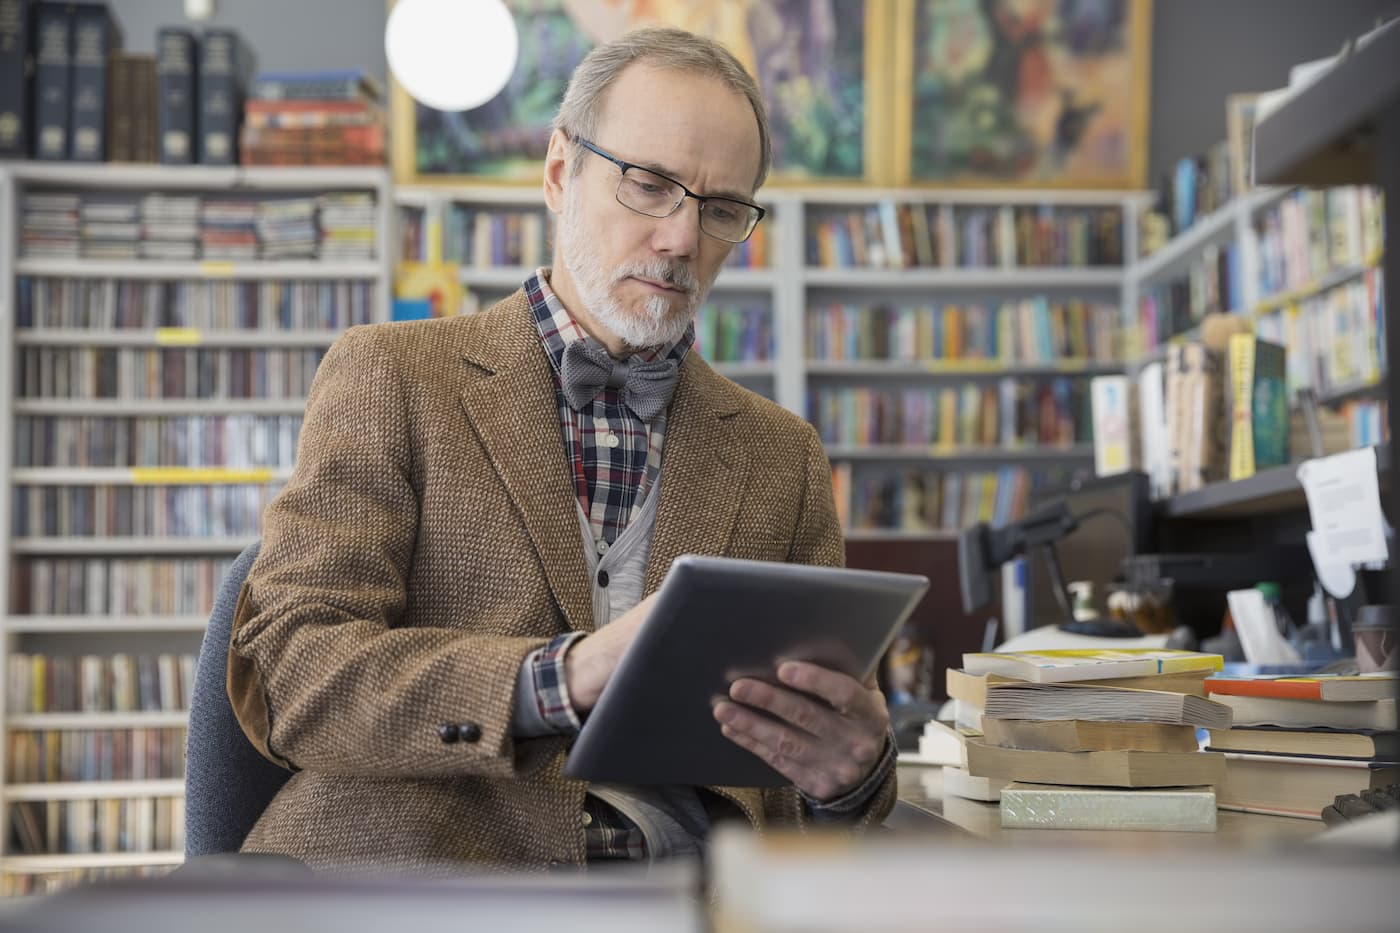 Bookstore owner on tablet